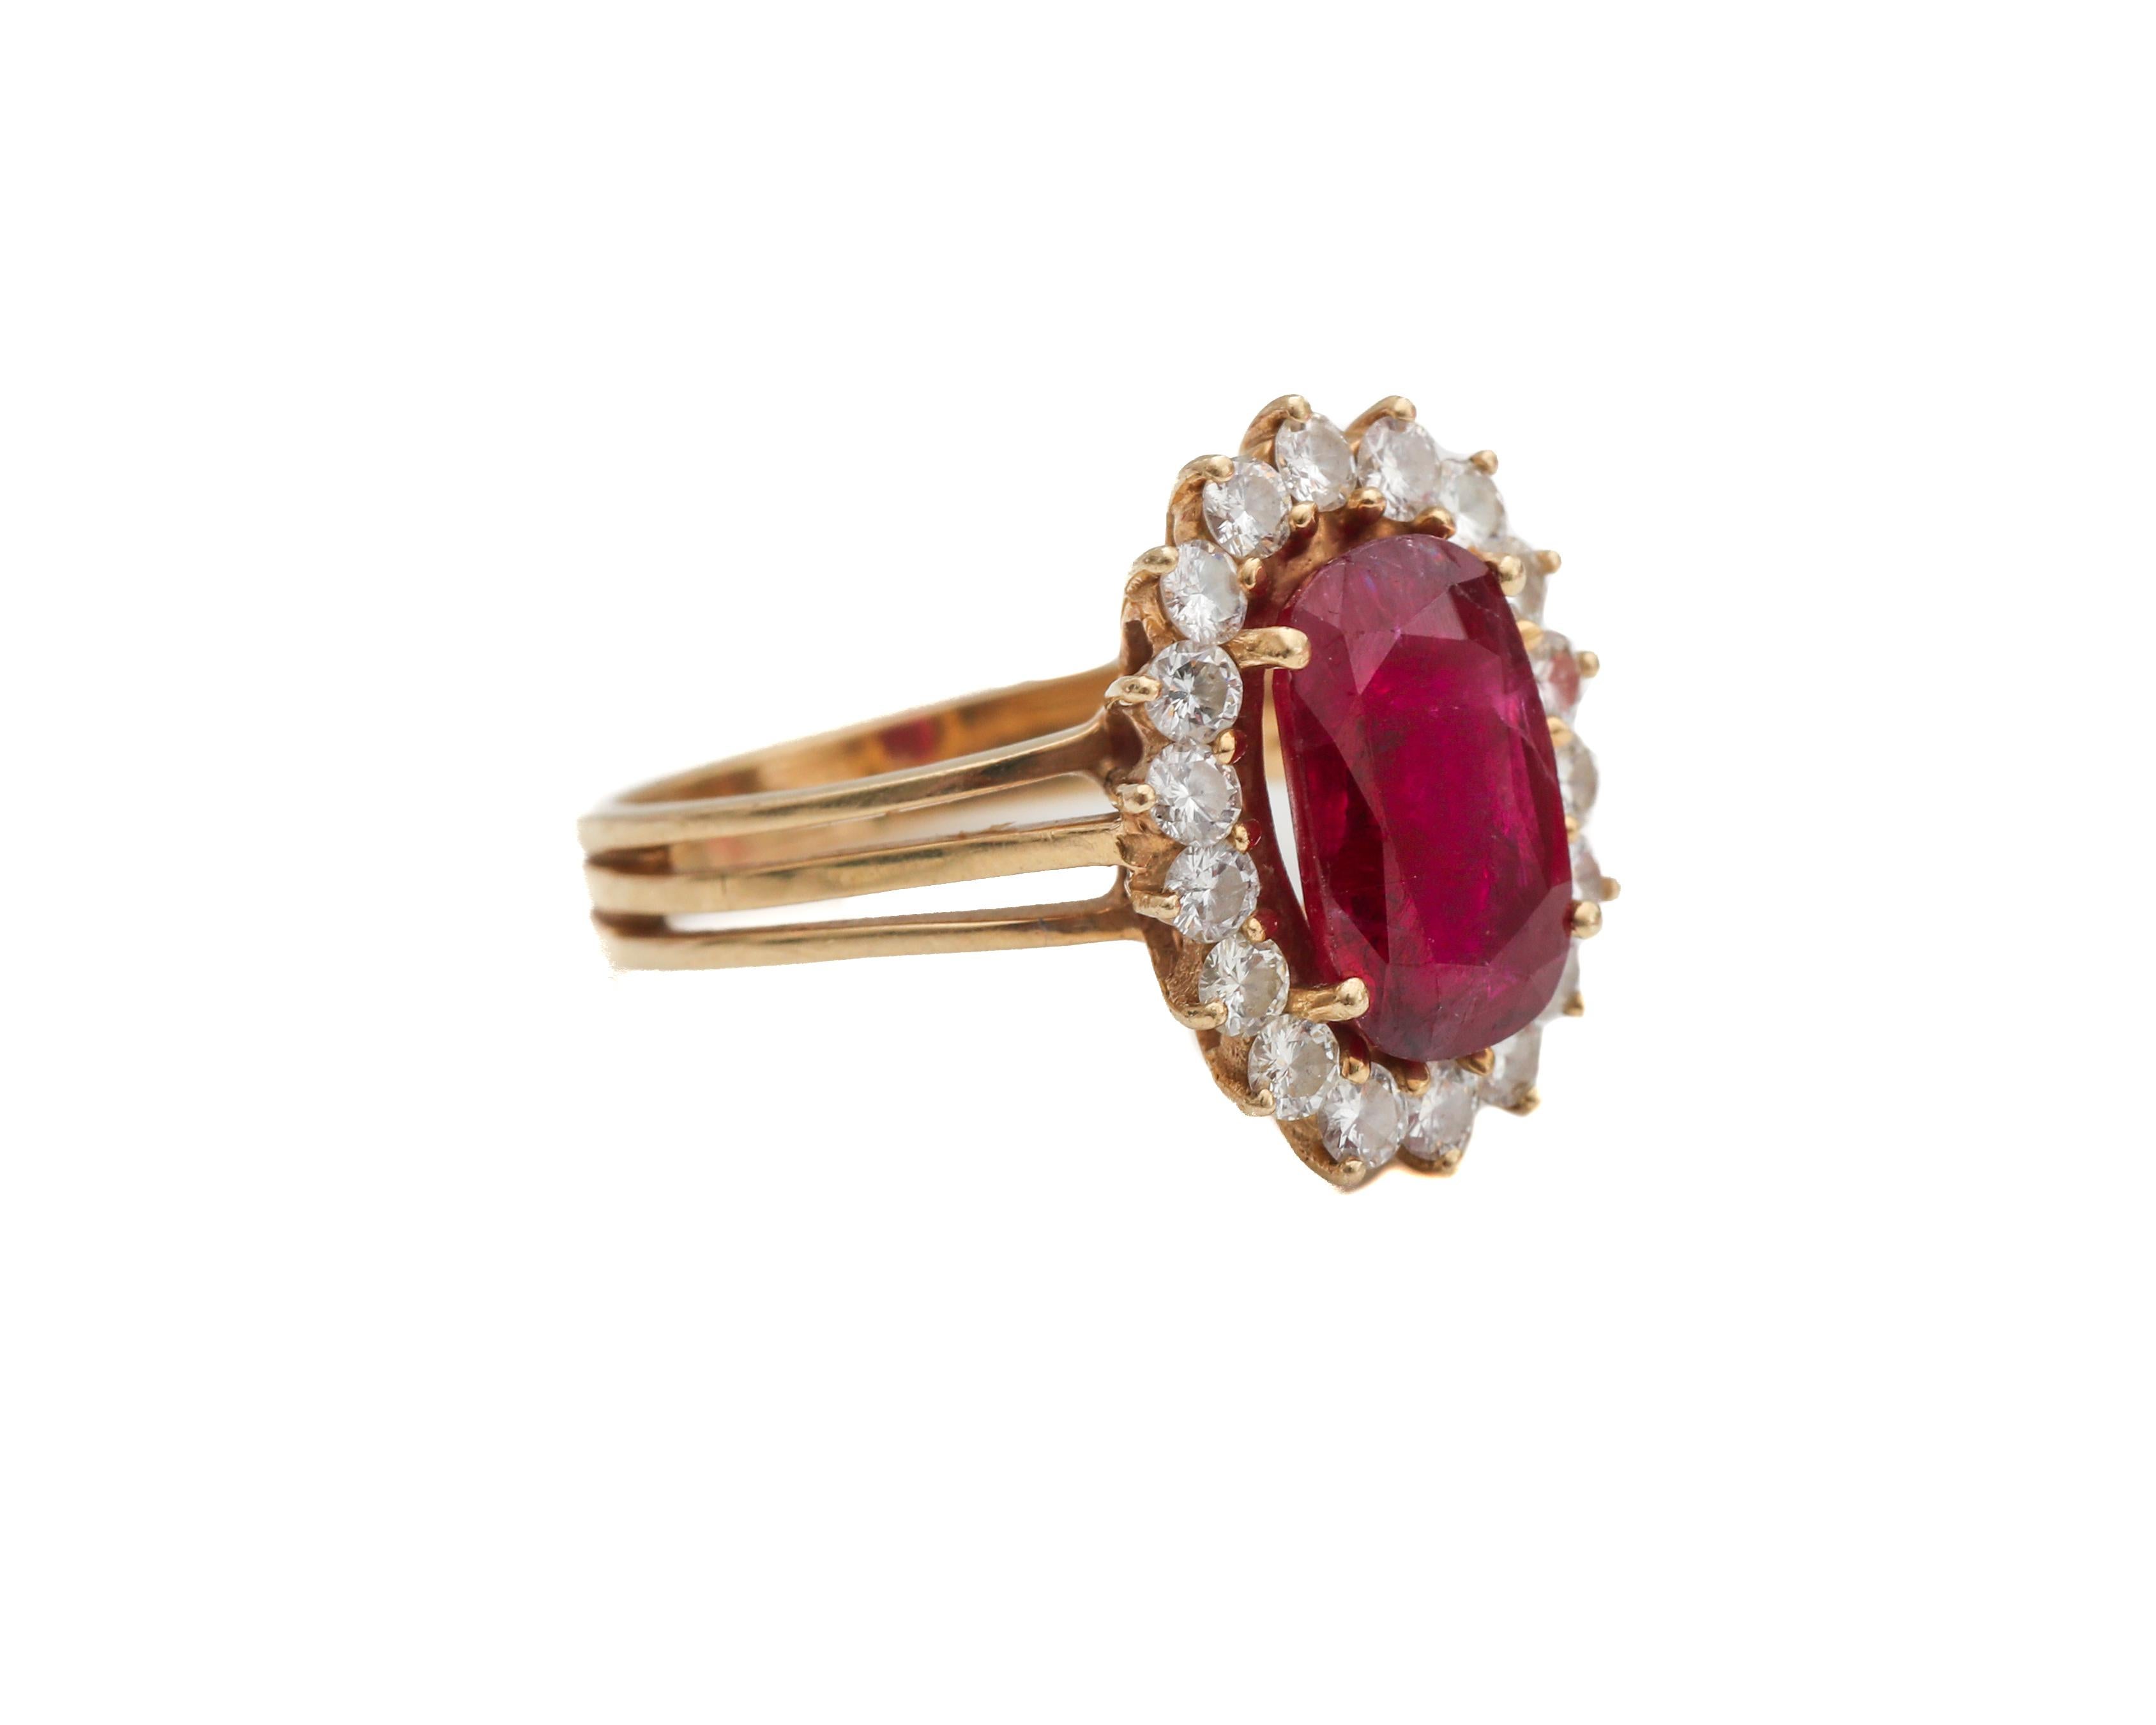 Absolutely stunning Ruby and Diamond Ring from the 1950s. This ring features a 1.5 carat Ruby, oval cut, 4-prongs and is surrounded by a sparkling halo of diamonds, 0.25 carats approximately. All Diamonds are also prong set, and boast H color VS